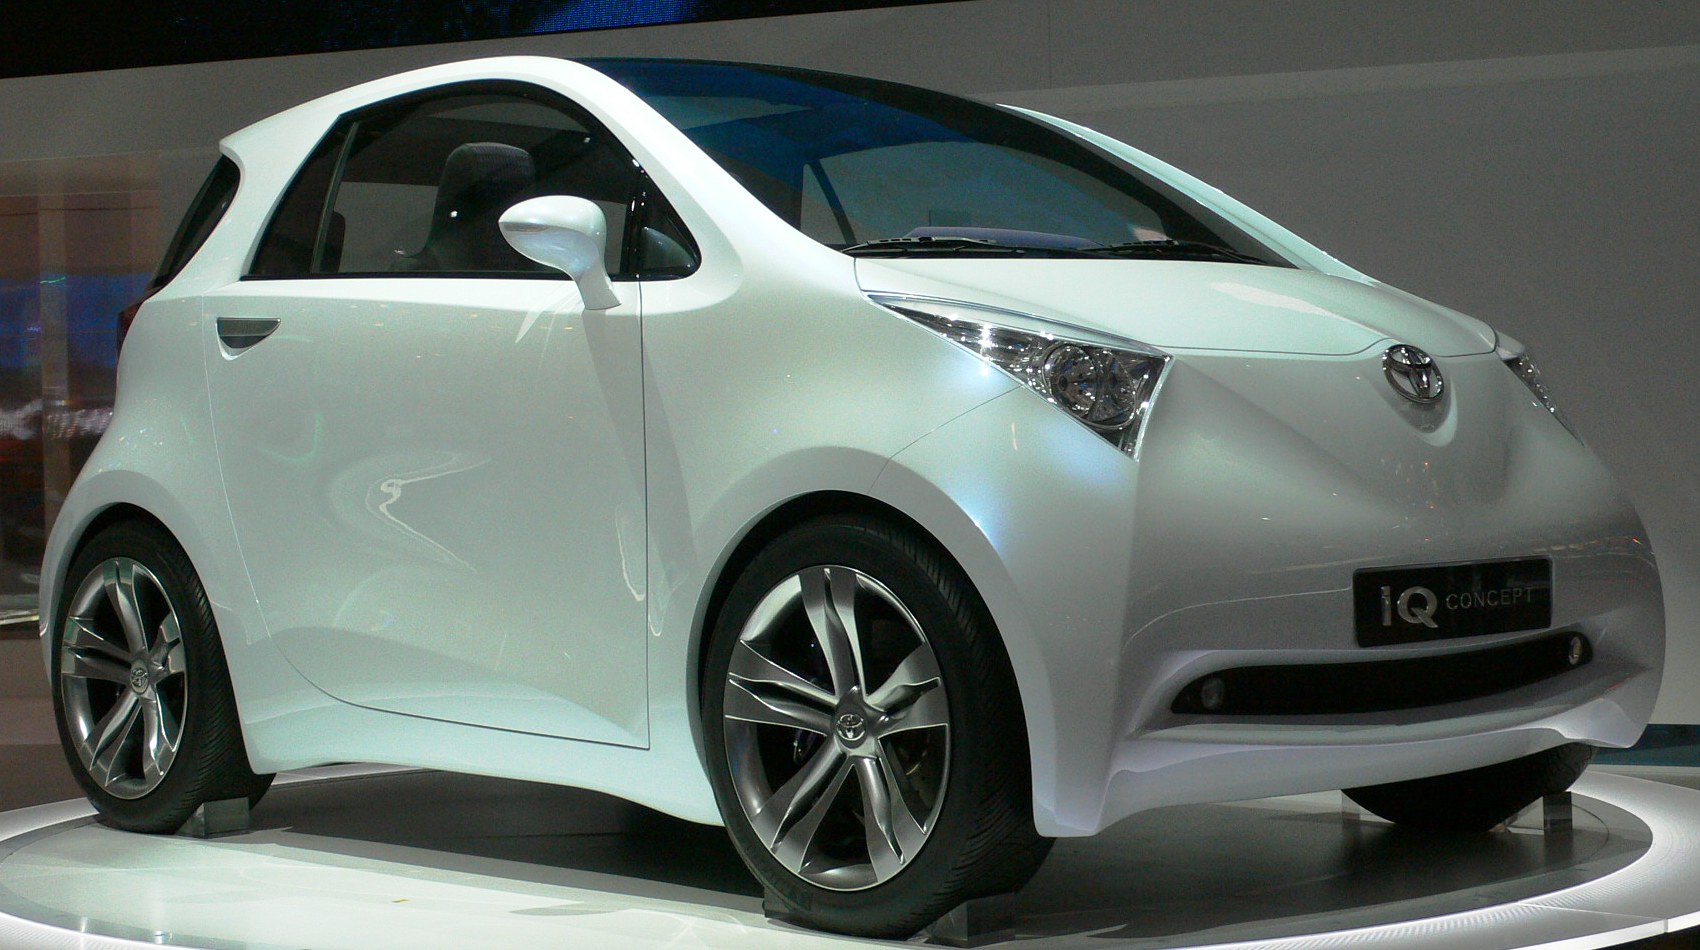 Toyota iQ 3 high quality Toyota iQ pictures on